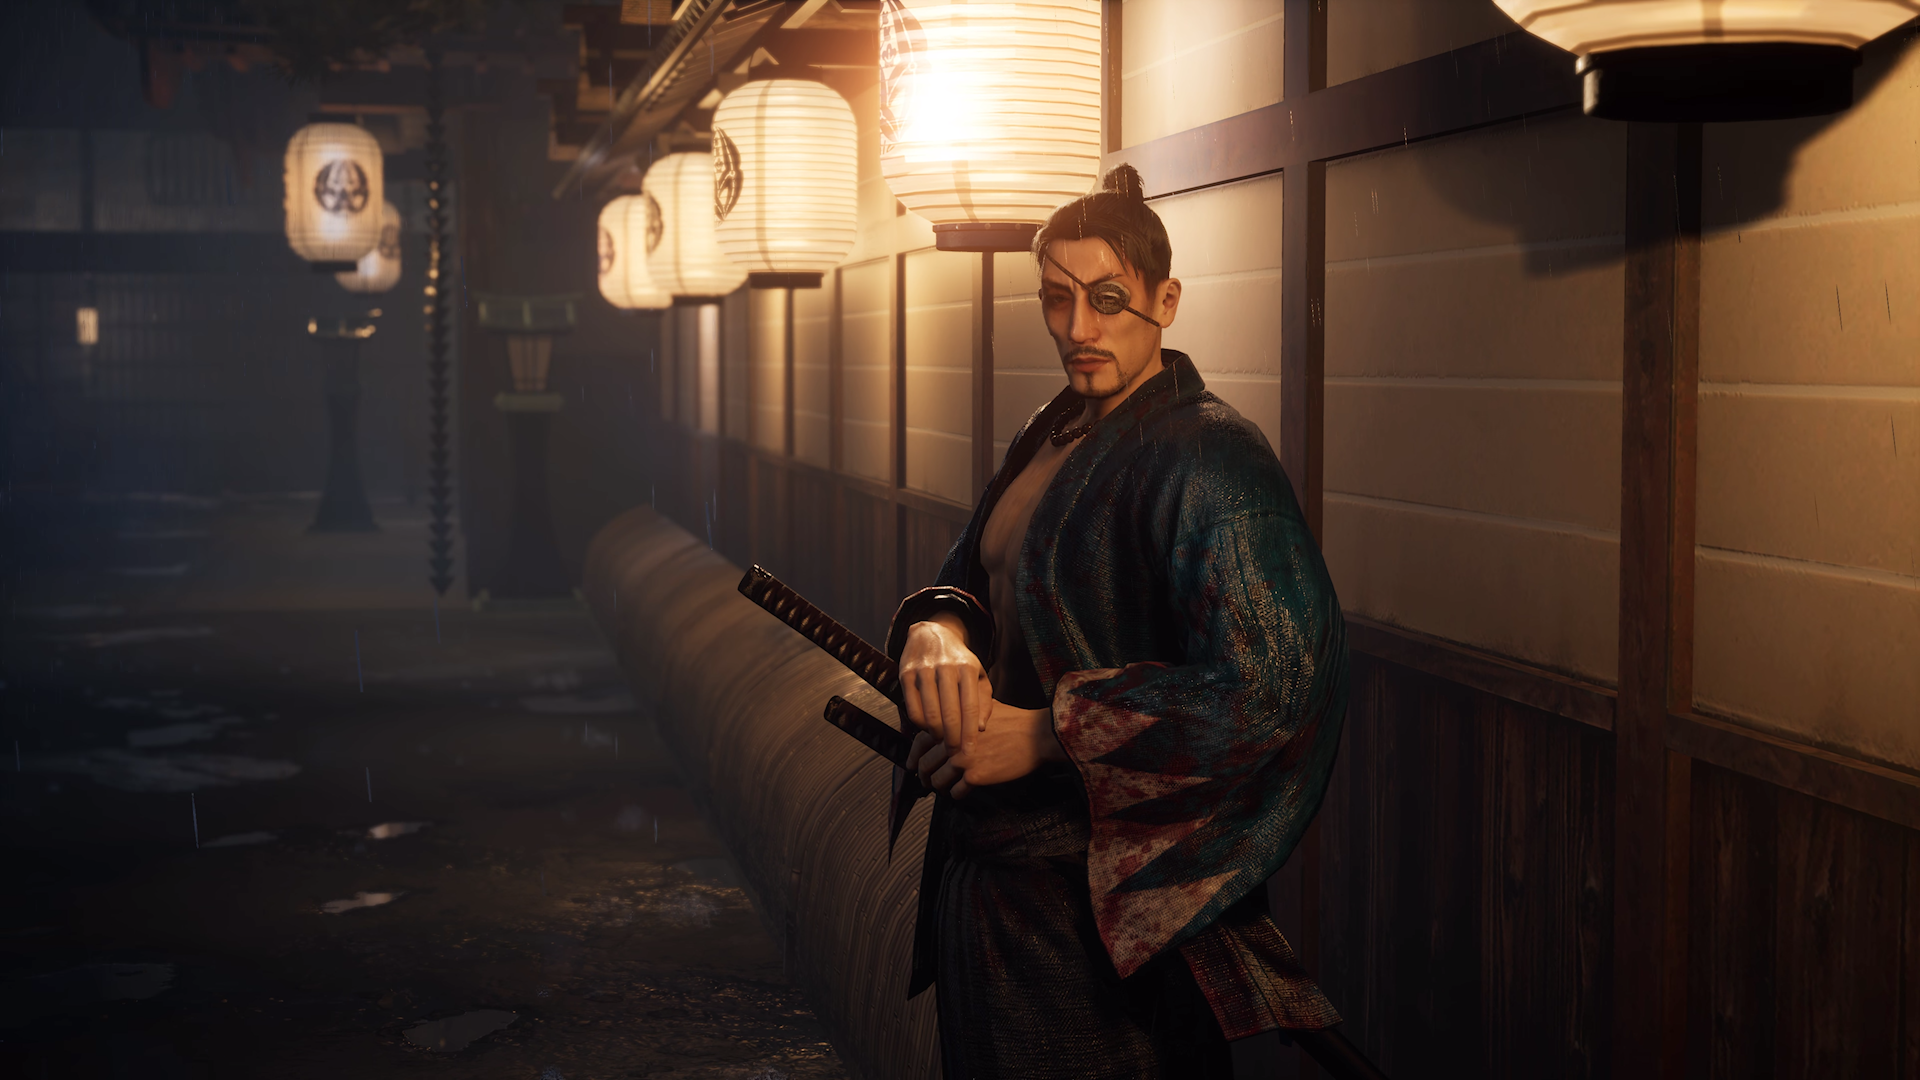 Like a Dragon: Ishin!' Review: A samurai epic leaves Japan for the